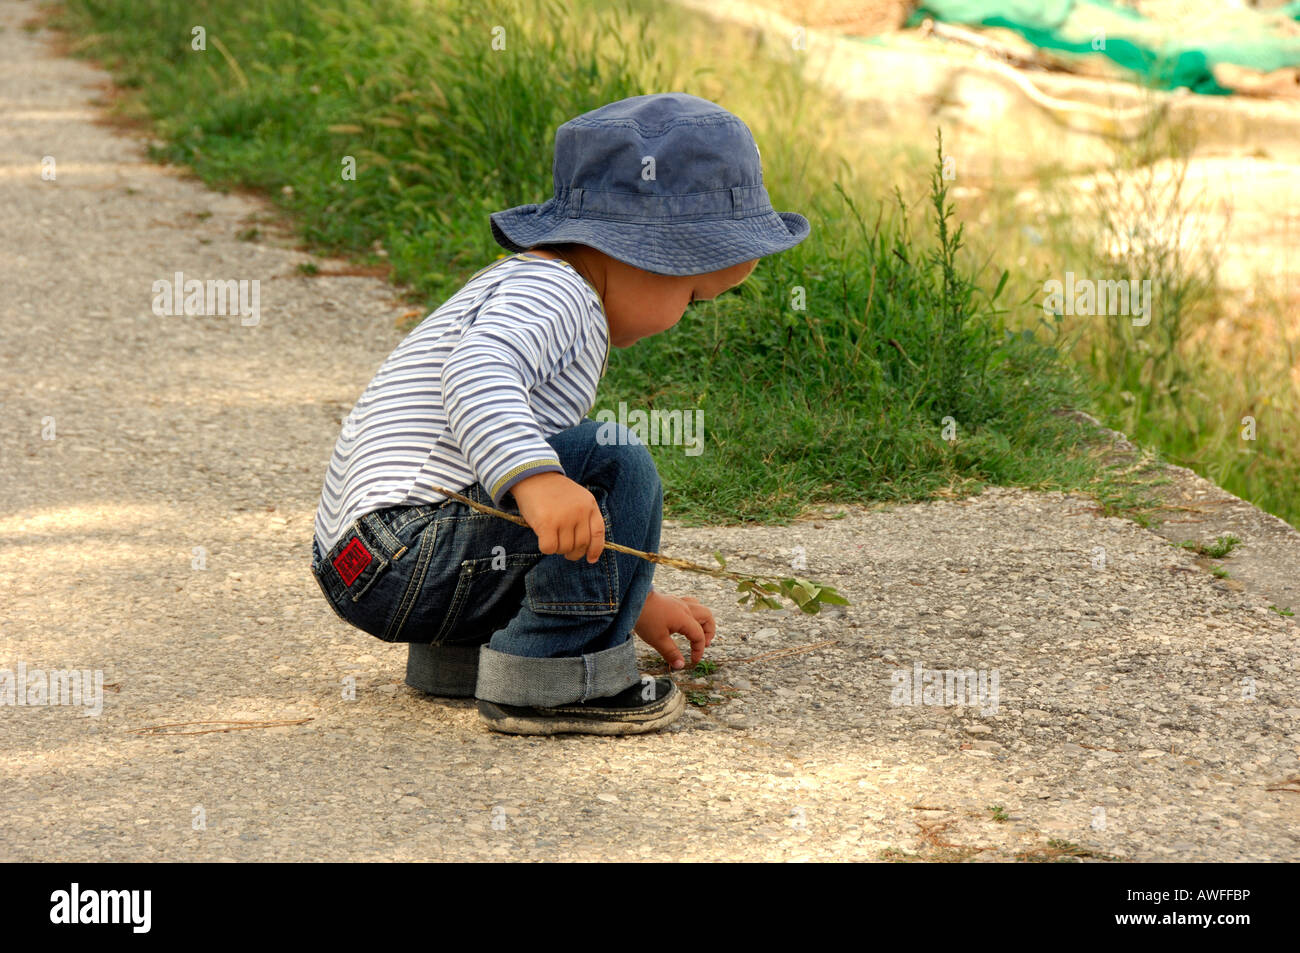 Little boy picking up something from the ground, Caorle, Veneto, Italy Stock Photo